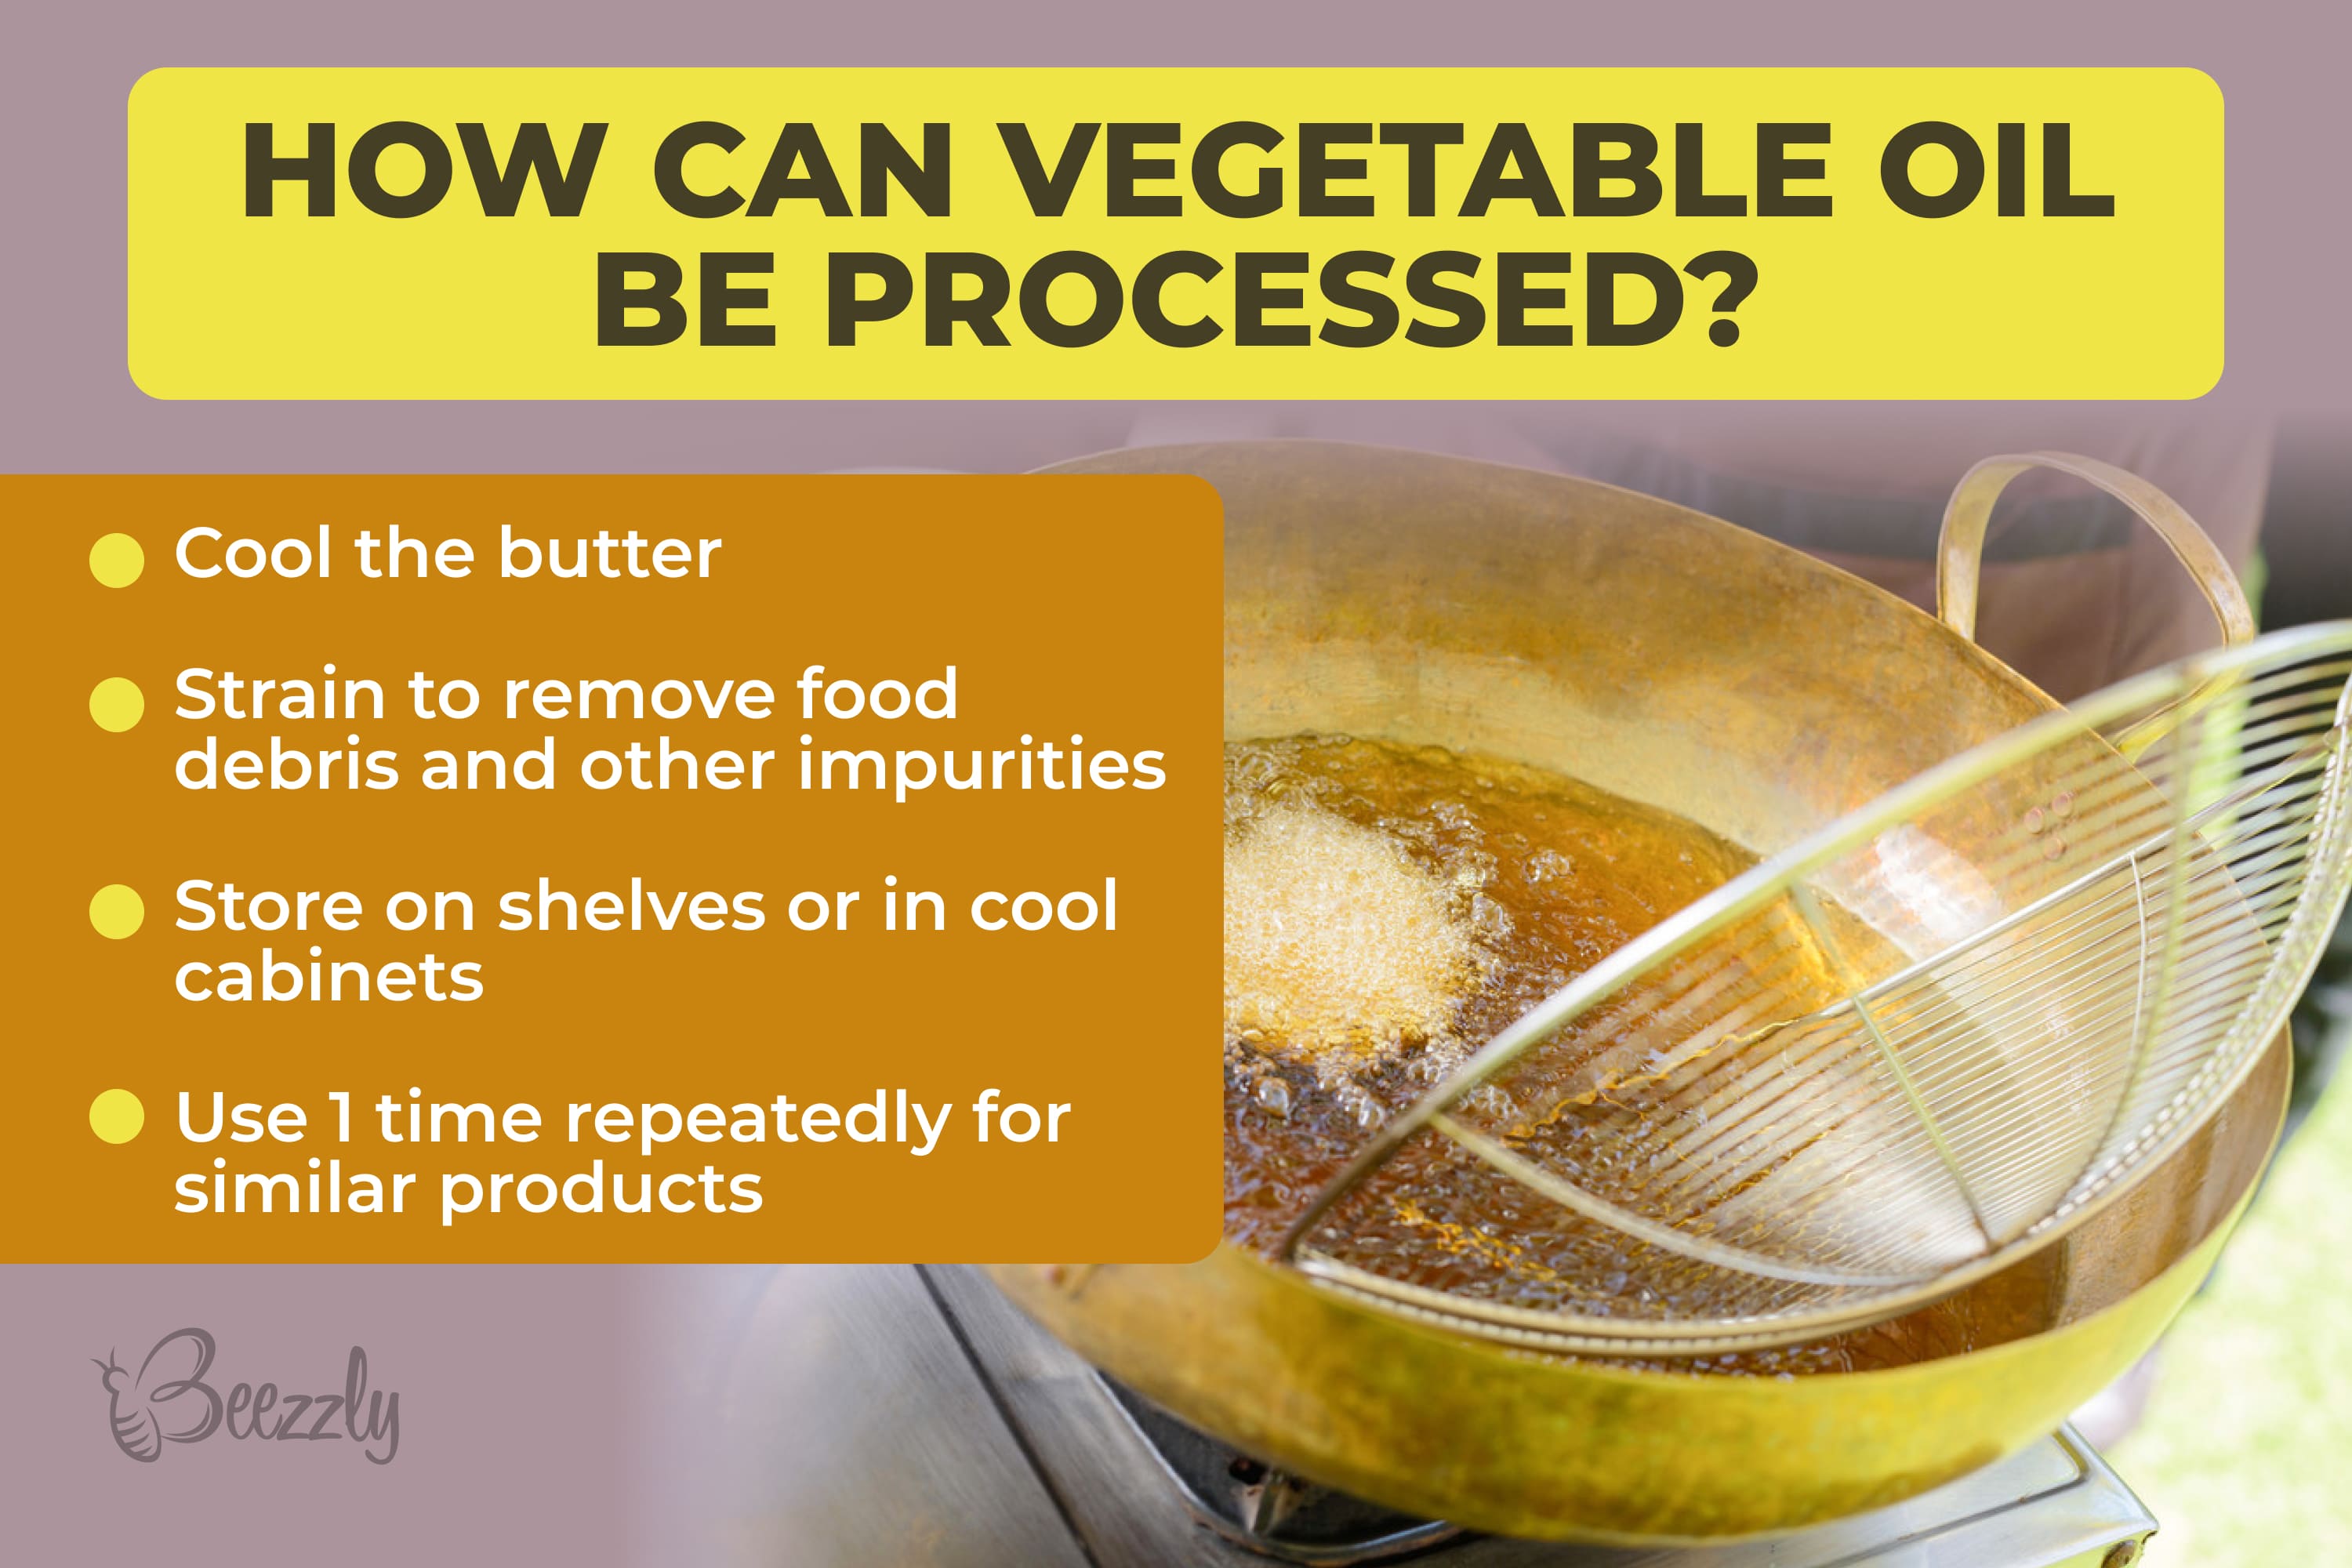 How can vegetable oil be processed